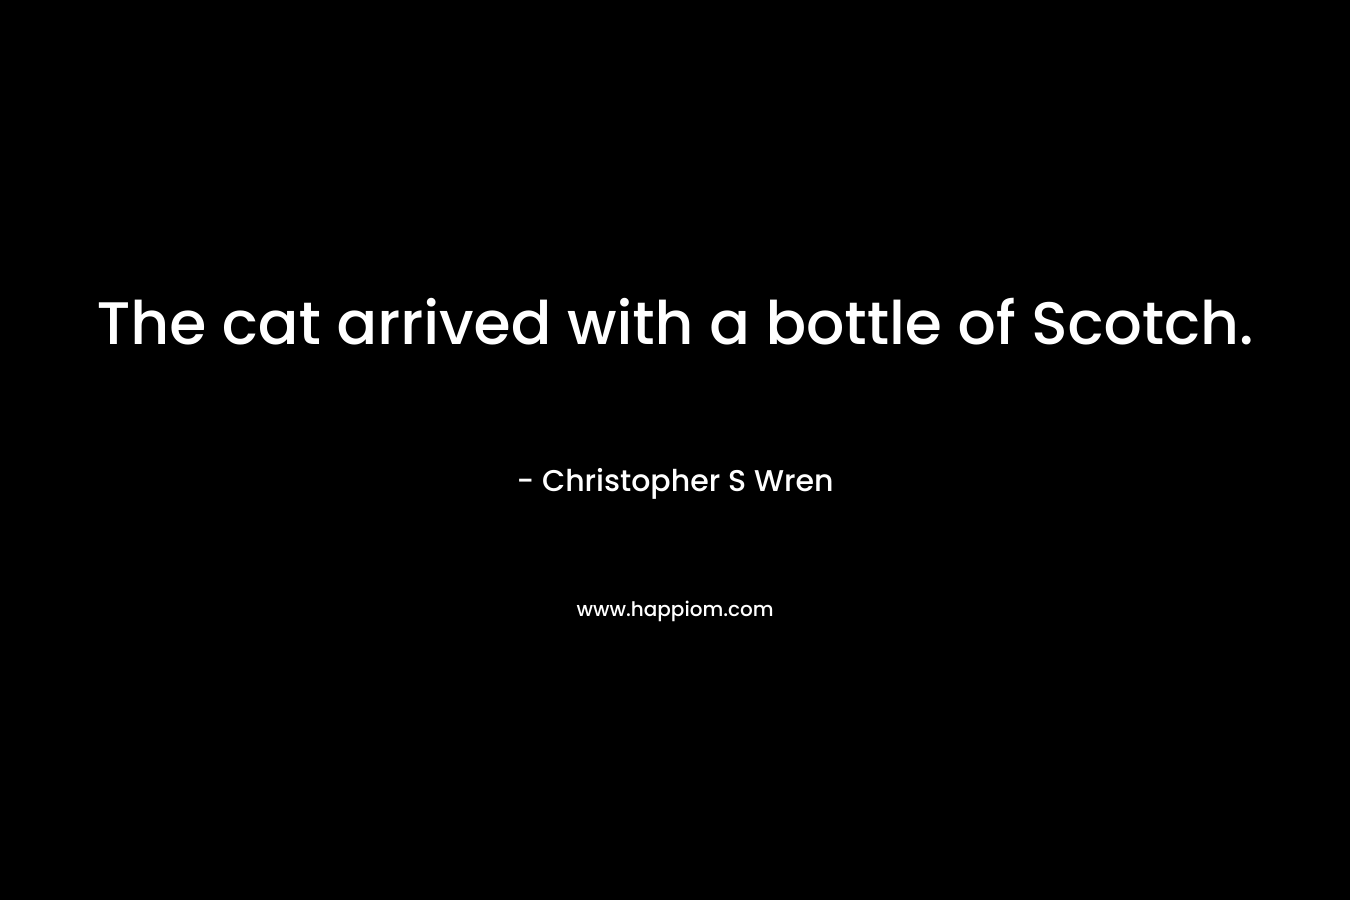 The cat arrived with a bottle of Scotch. – Christopher S Wren